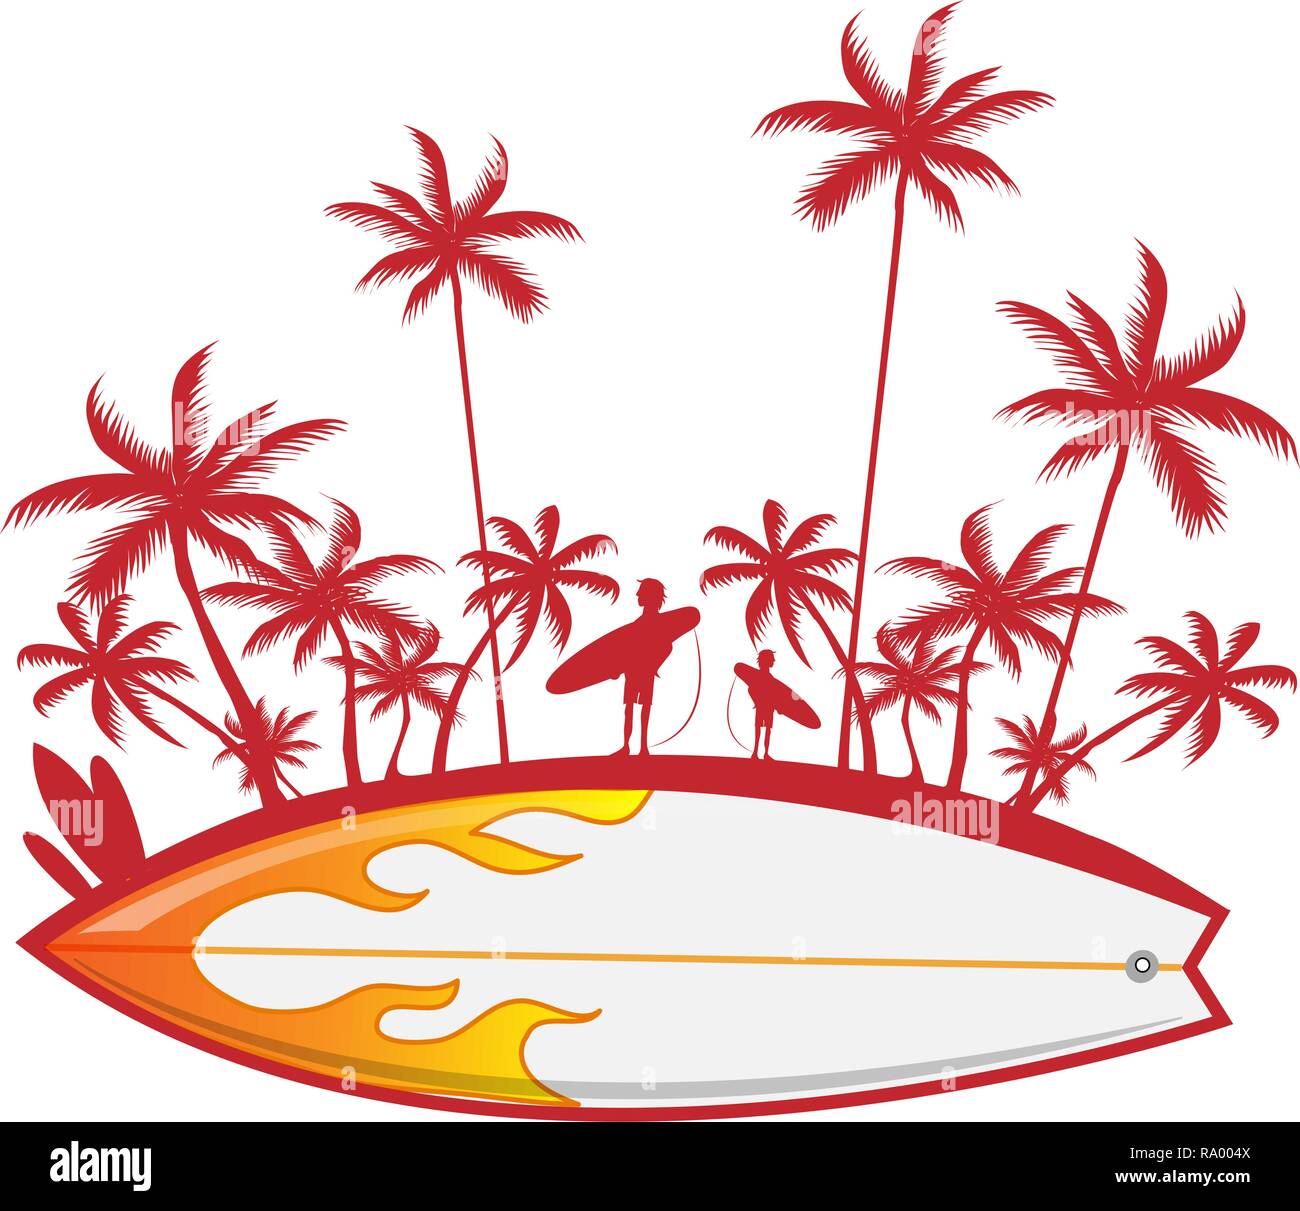 surfboard with palm tree isoalted on white. vector illustration Stock Vector